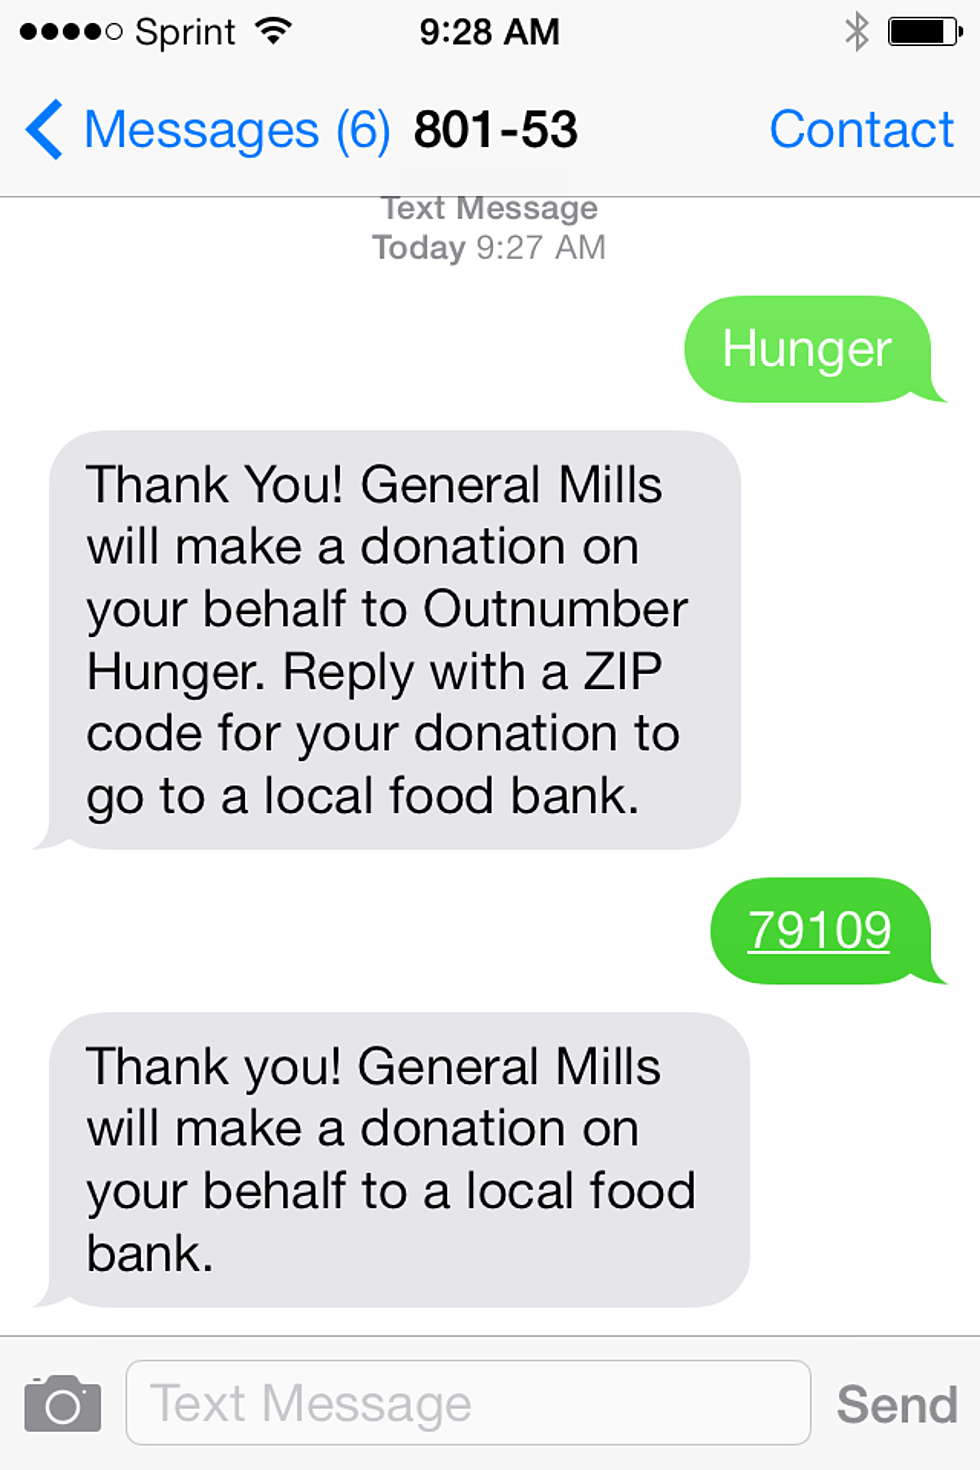 Grab Your Phone for A Quick and Easy Way to Help the High Plains Food Bank